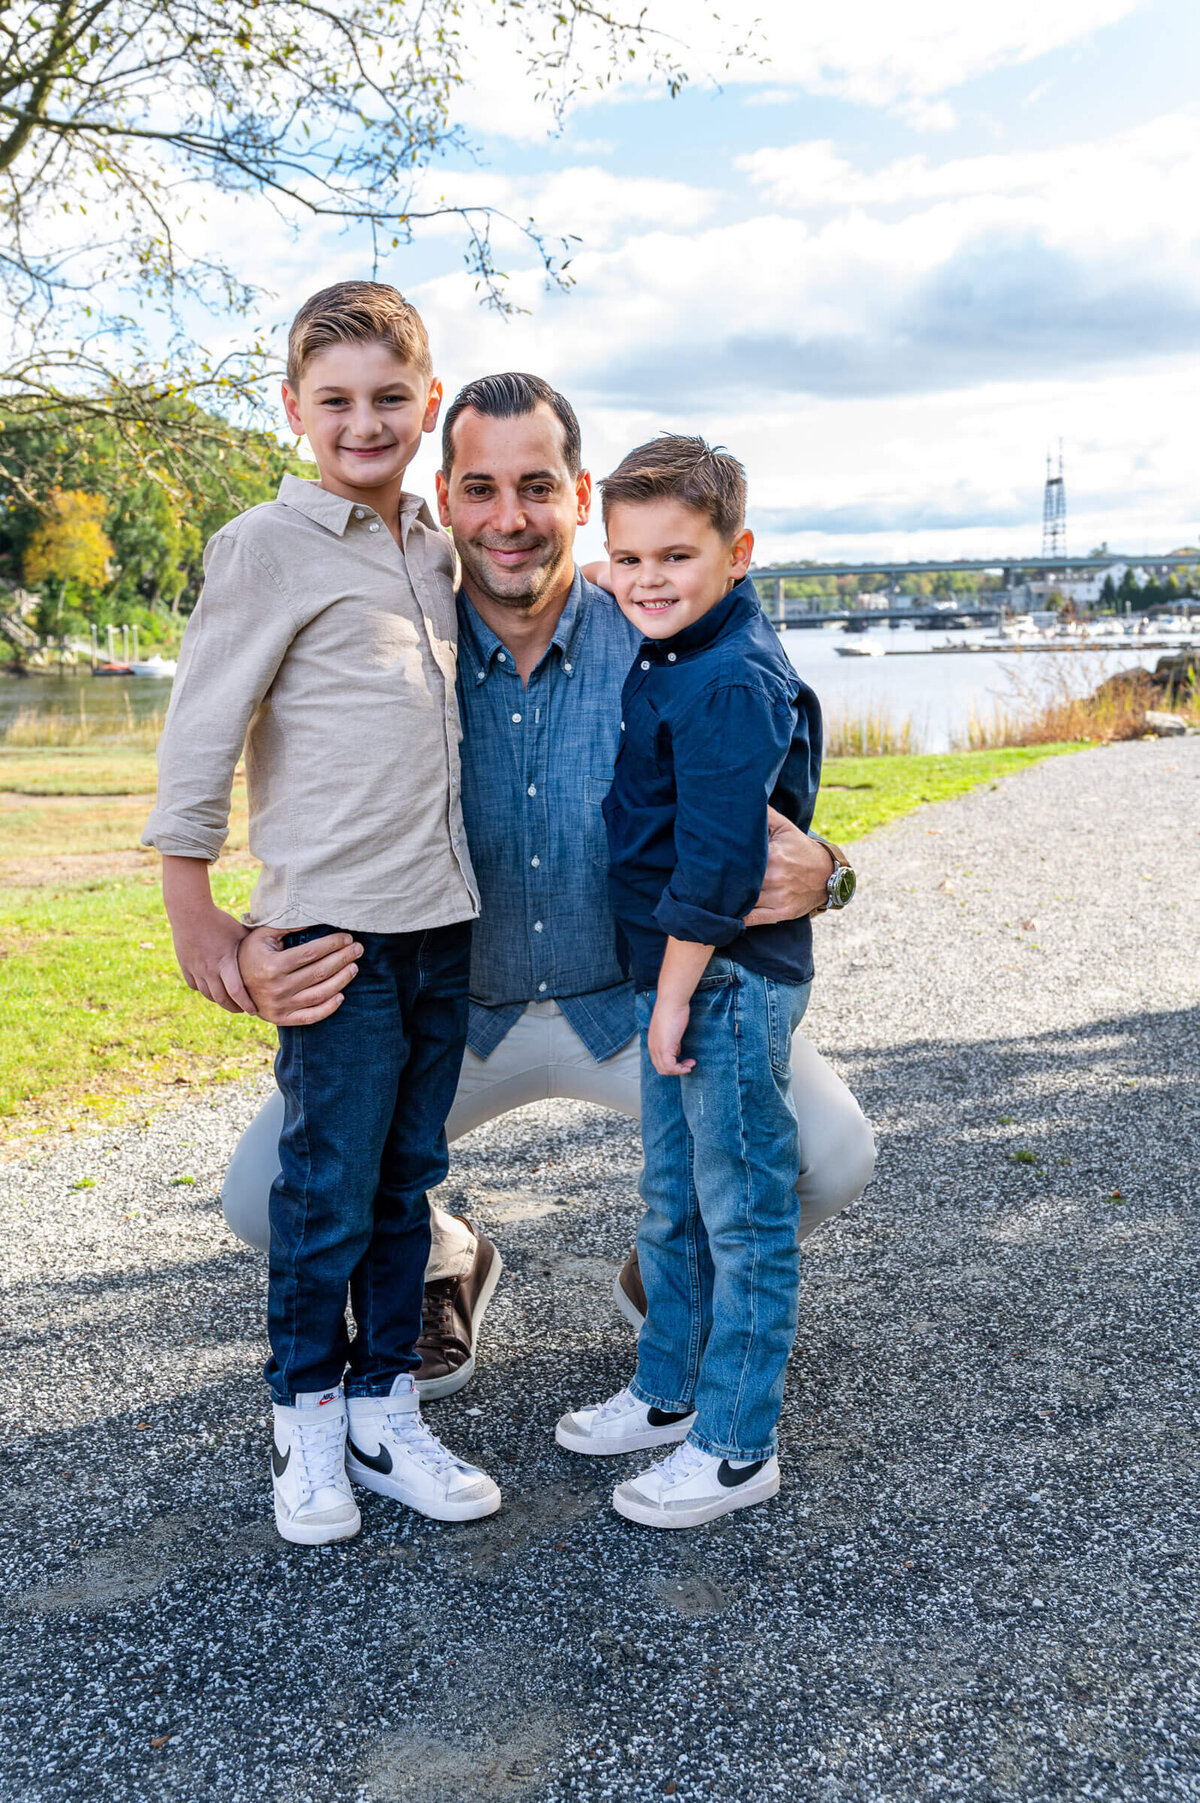 Father with this two young sons, kneeling down for a family photoshoot by the river in Westport, CT.